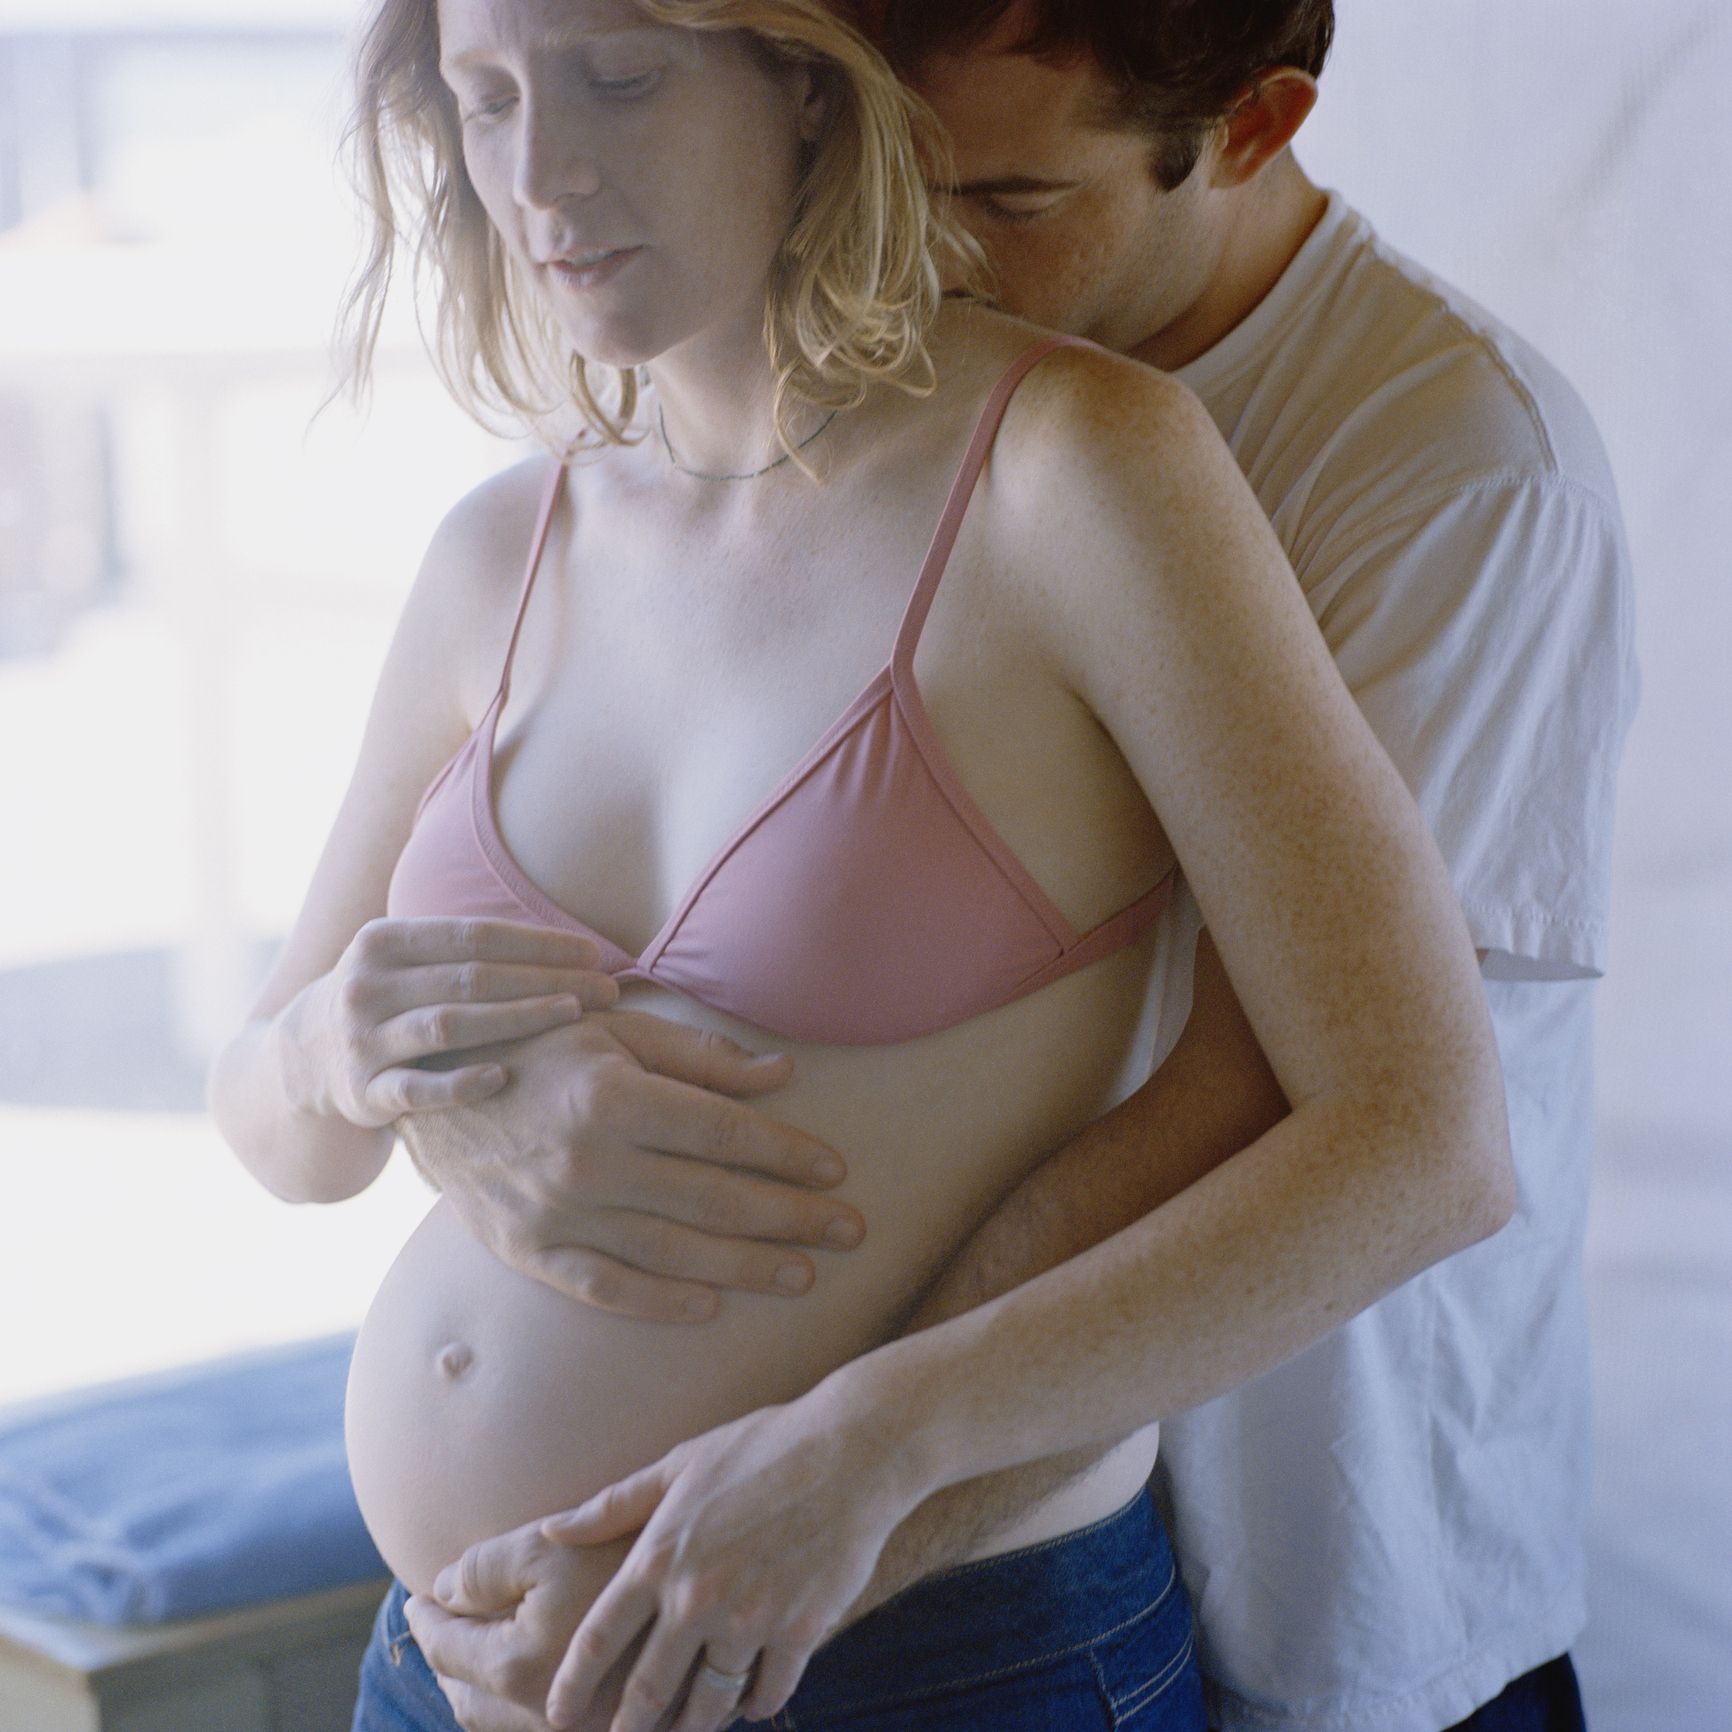 Sex During Pregnancy - How to Safely Have Sex During Pregnancy